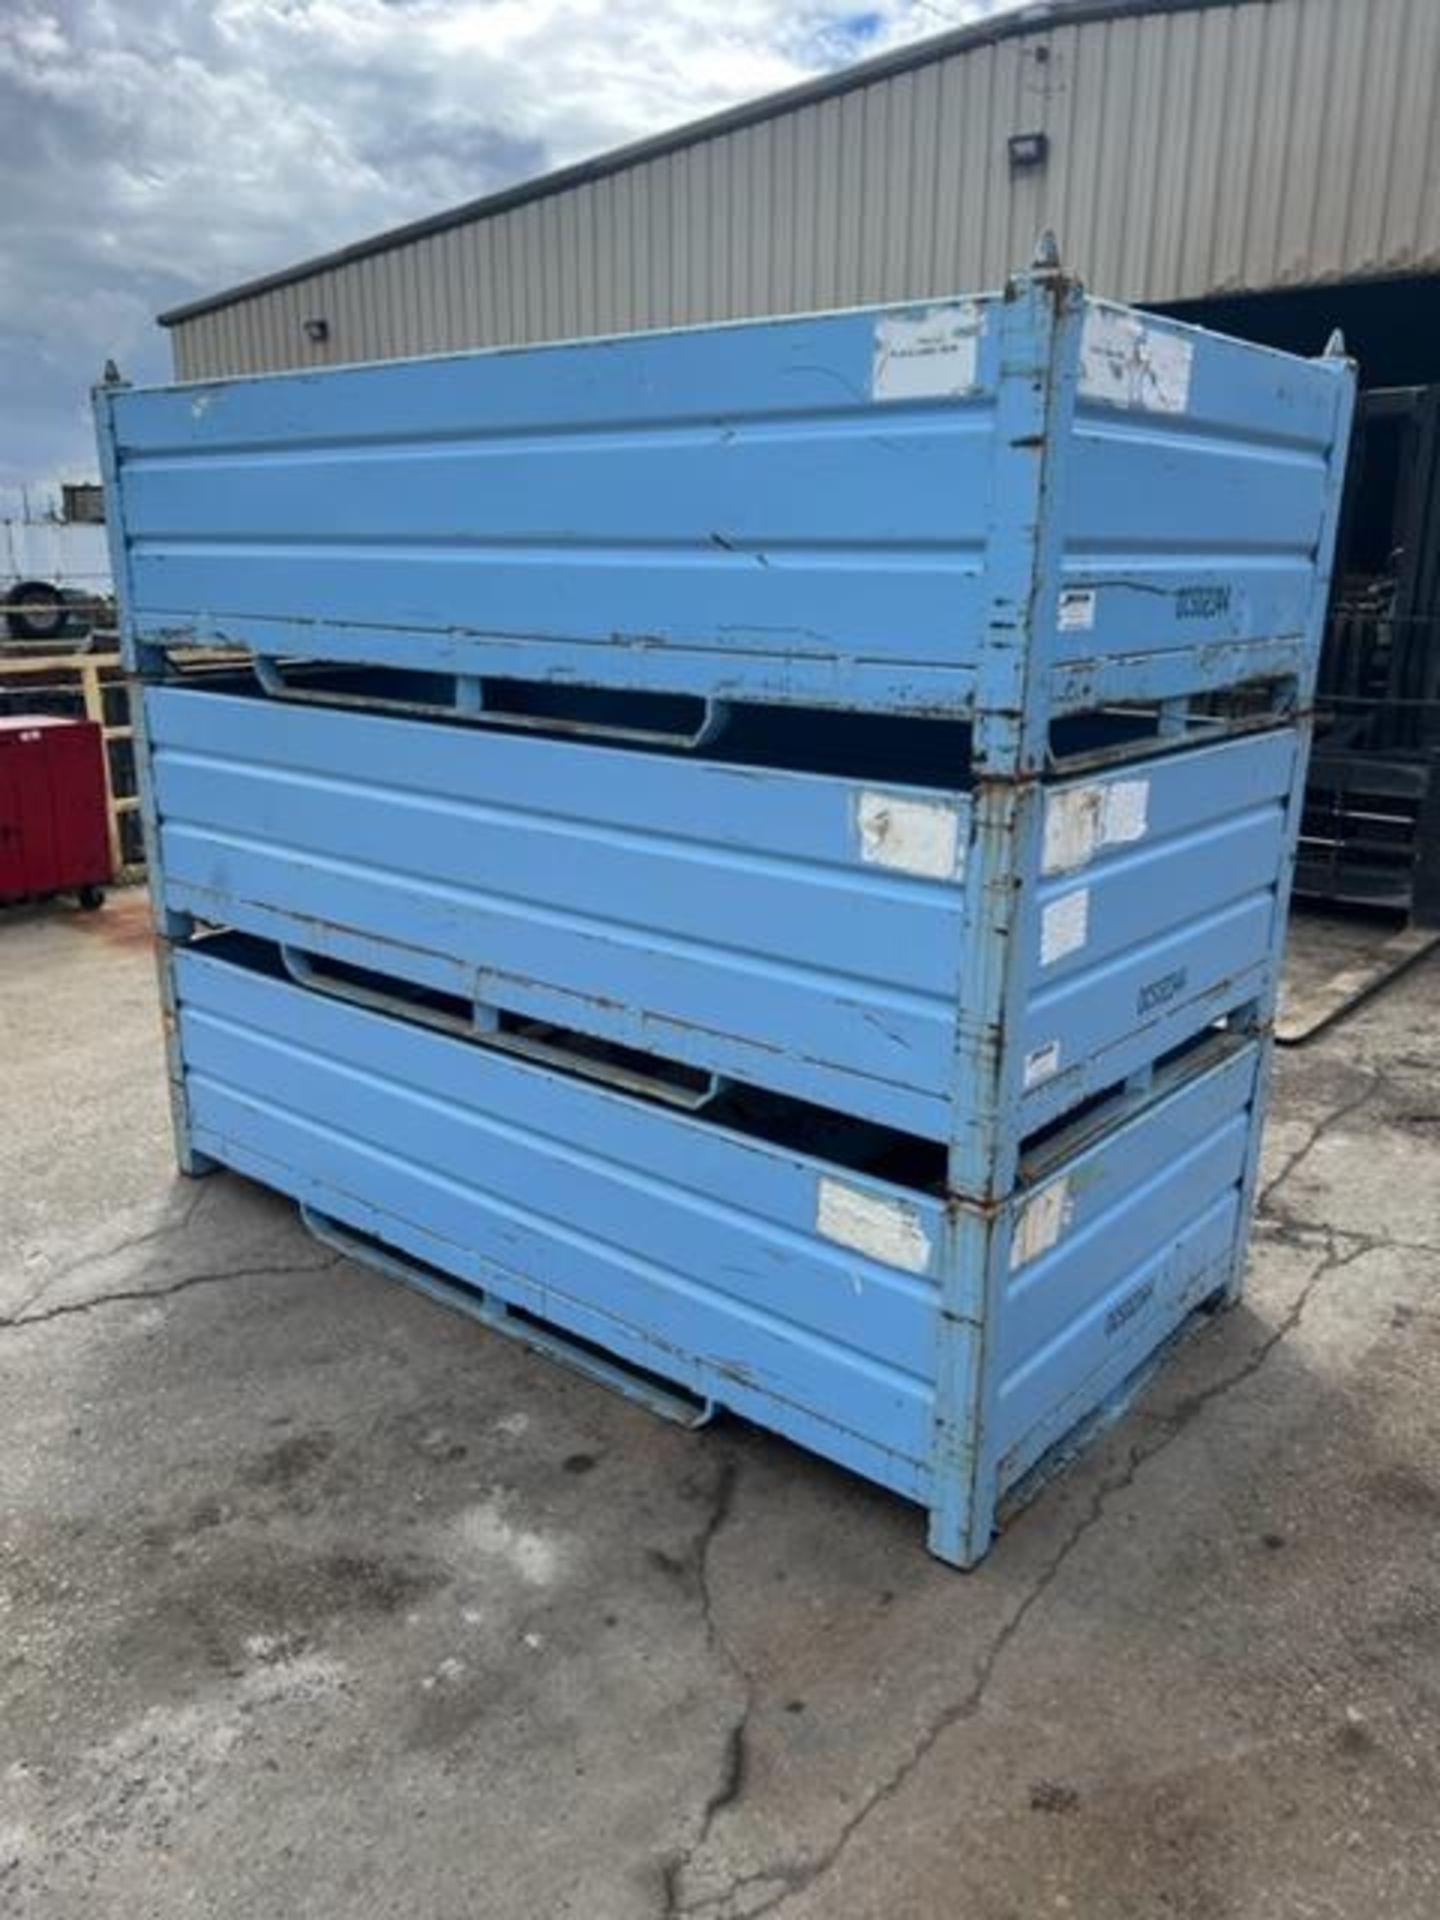 Lot of 3 (3 units) Stackable Steel Bins 96x48x27" - Image 2 of 2